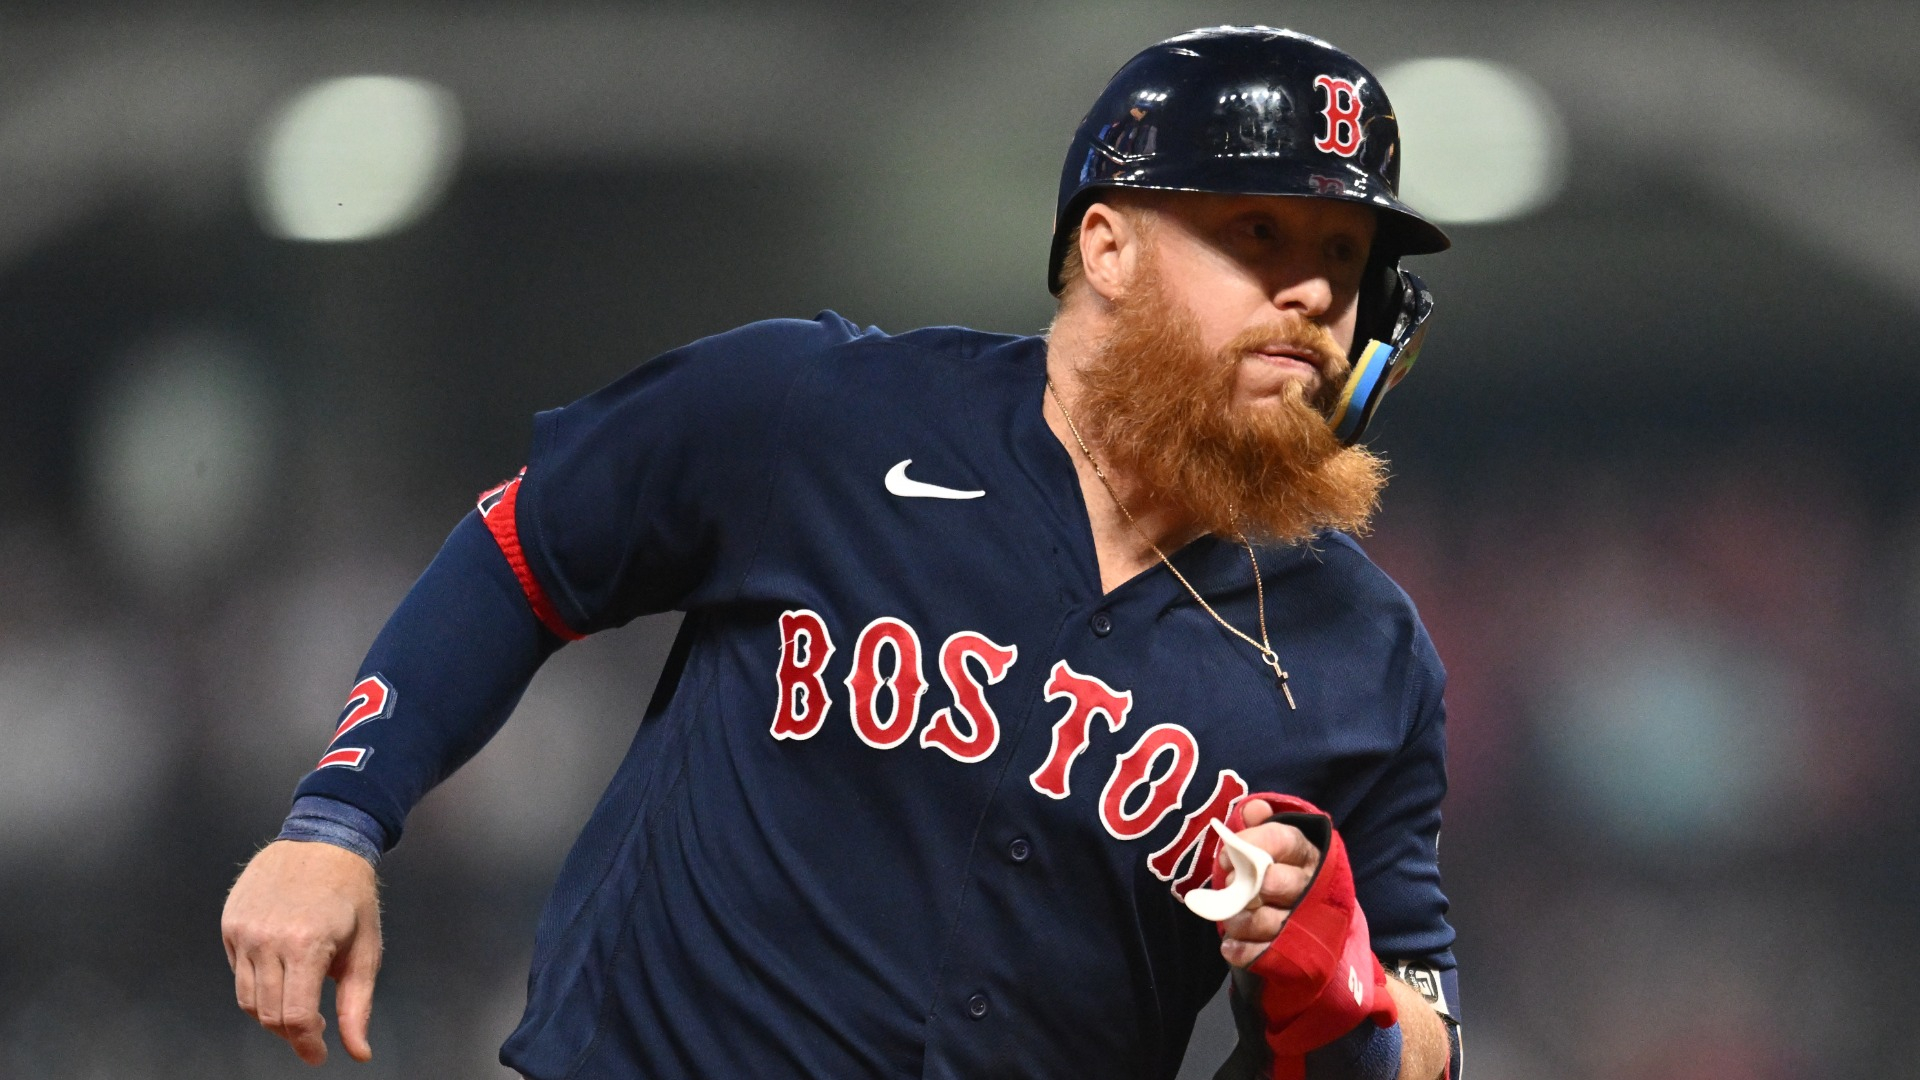 First look at the authentic Justin Turner jerseys in the Red Sox